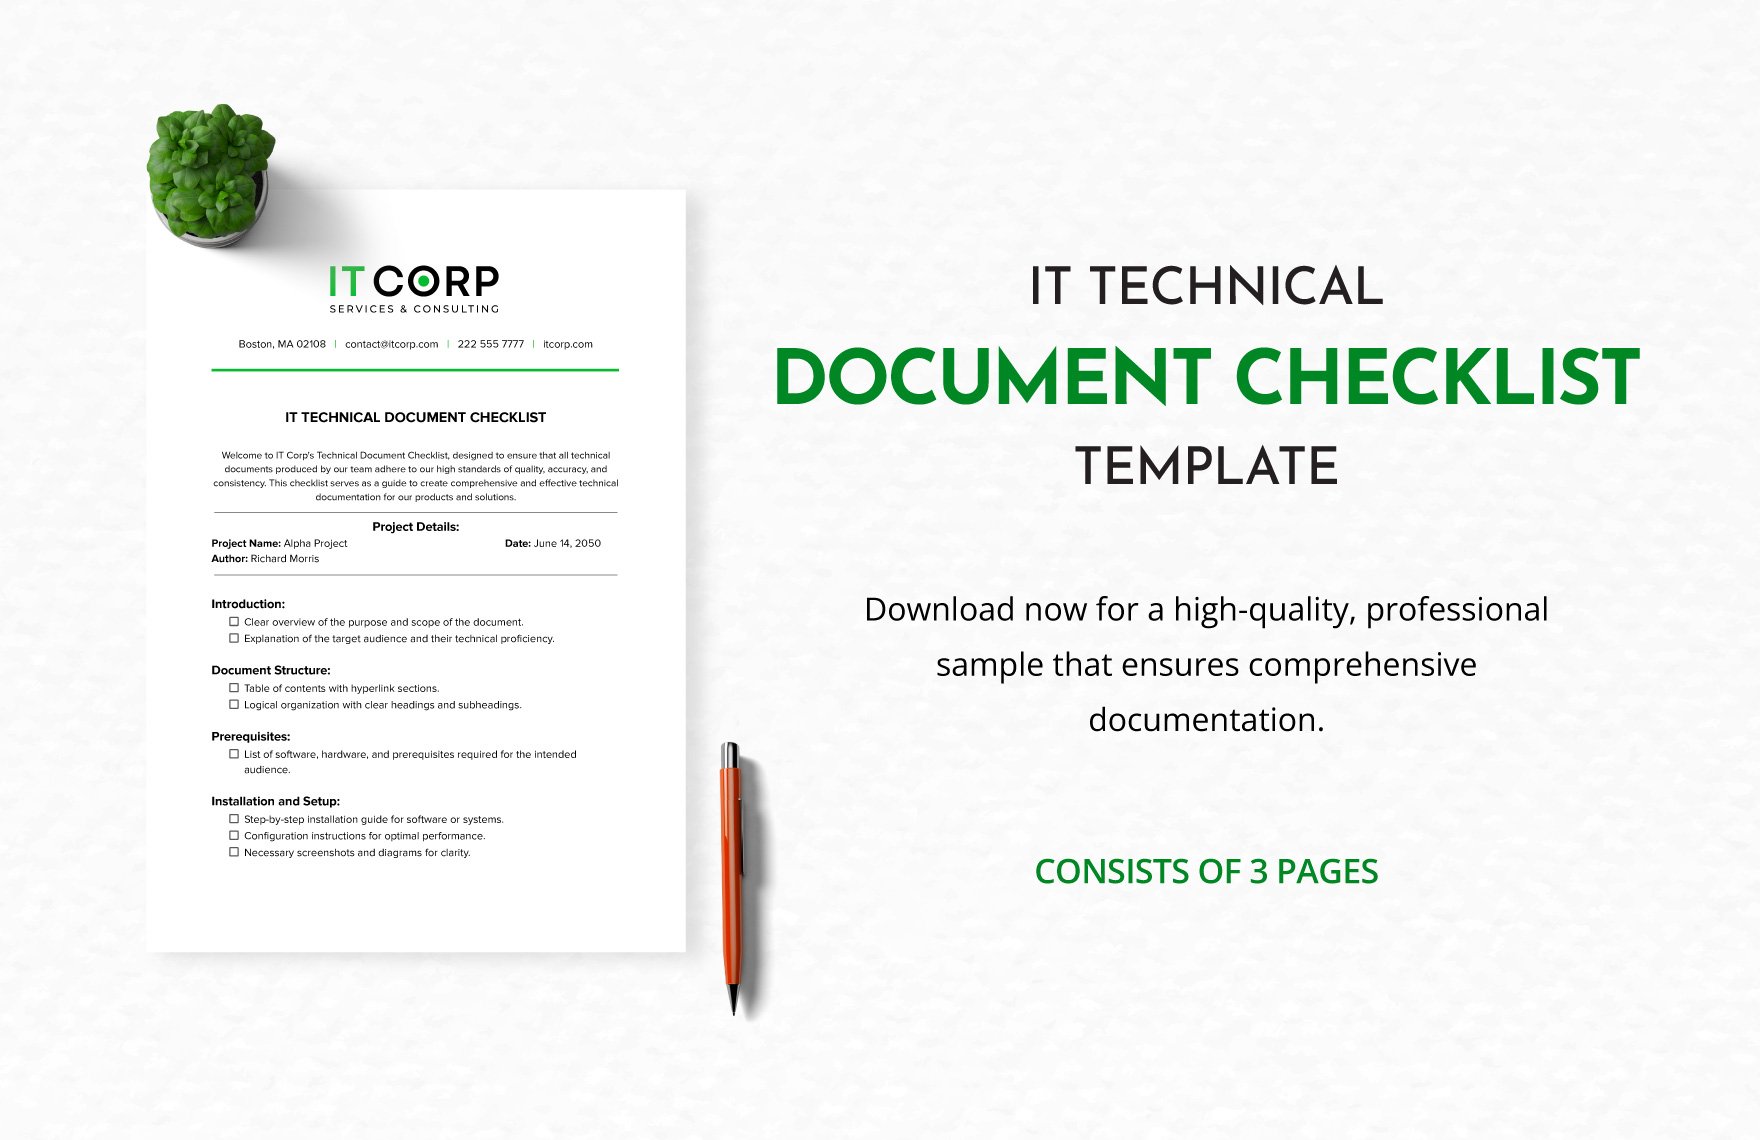 IT Technical Document Checklist Template in Word, Google Docs, PDF